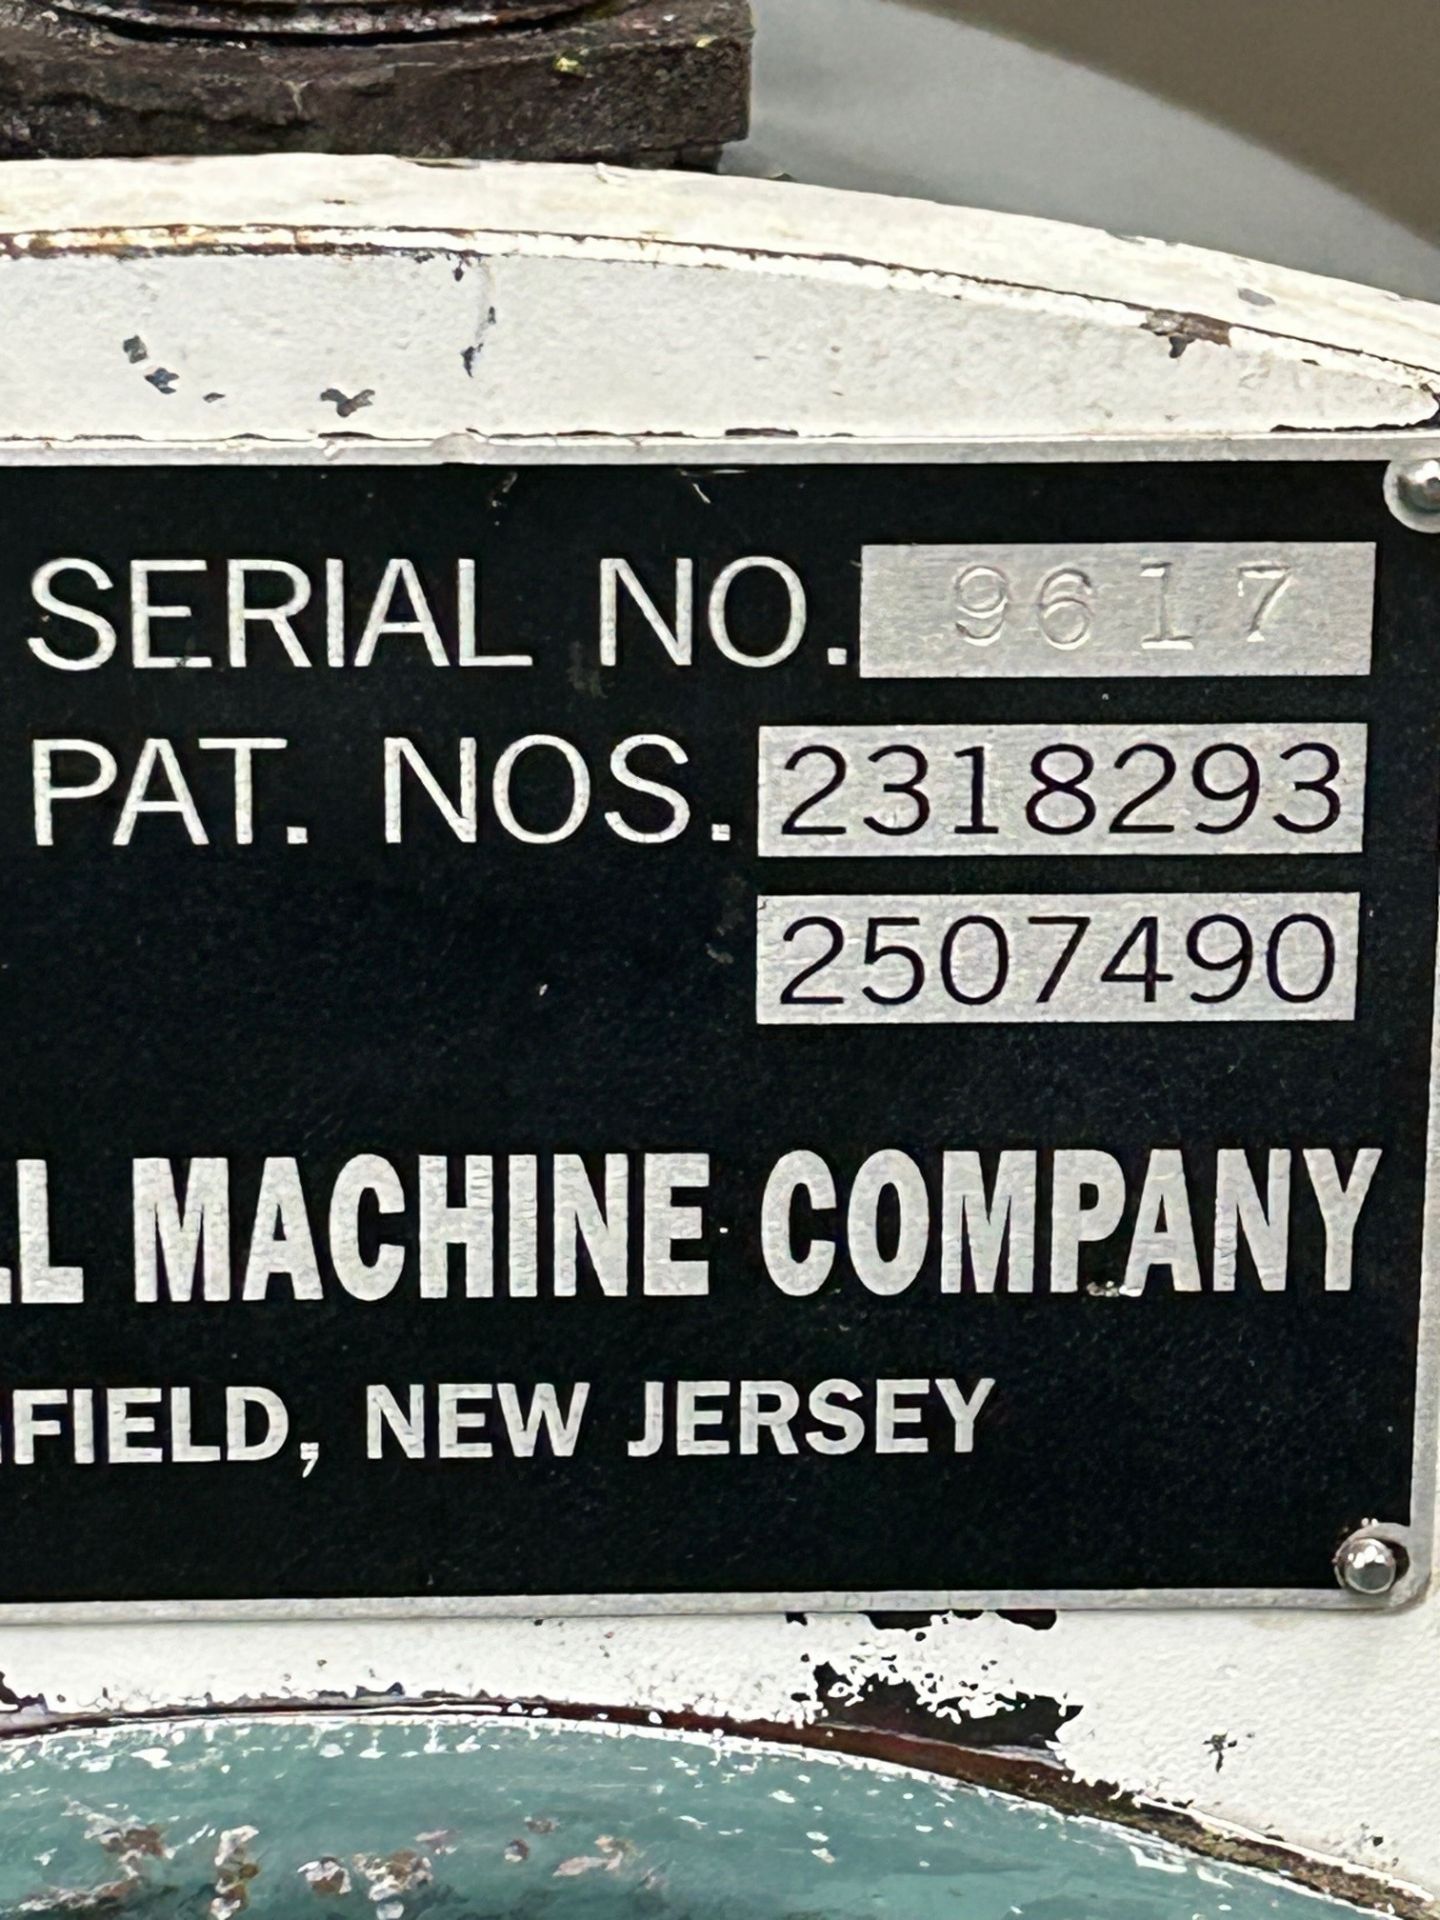 Cornell D16 Versator, S/N 9617, S/S Contact Parts (Located Rahway, NJ) - Image 5 of 5